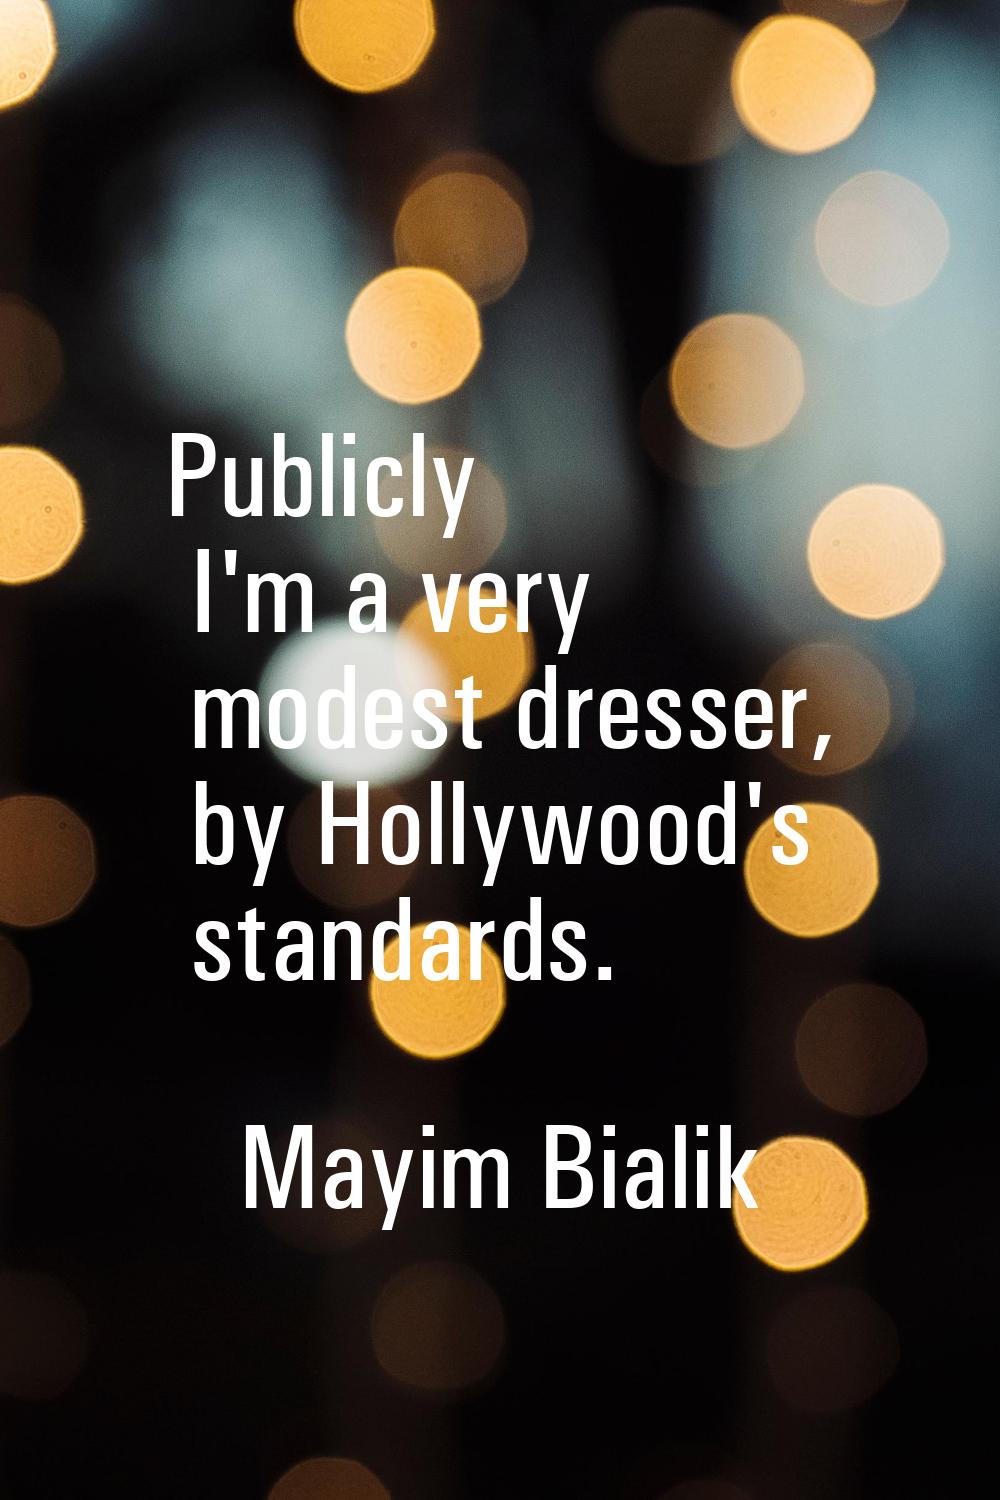 Publicly I'm a very modest dresser, by Hollywood's standards.